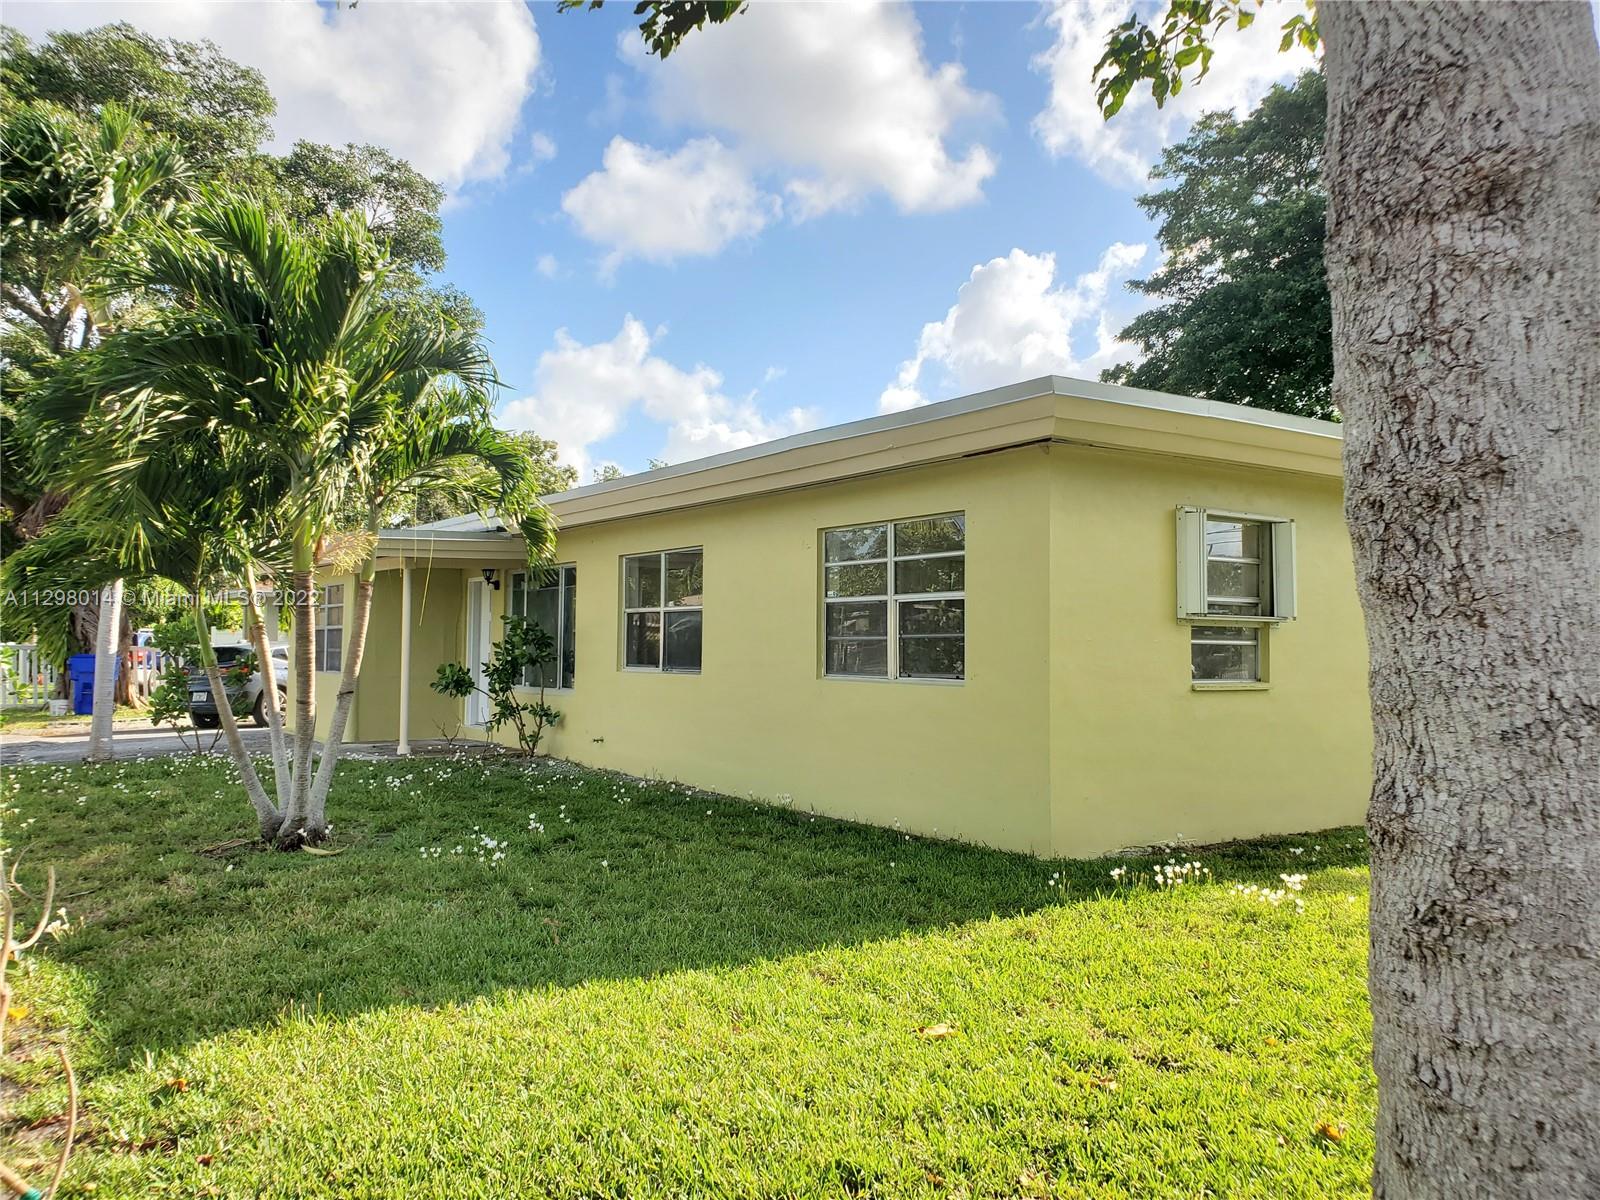 507 N 61st Ave, Hollywood, Florida 33024, ,Residentialincome,For Sale,507 N 61st Ave,A11298014